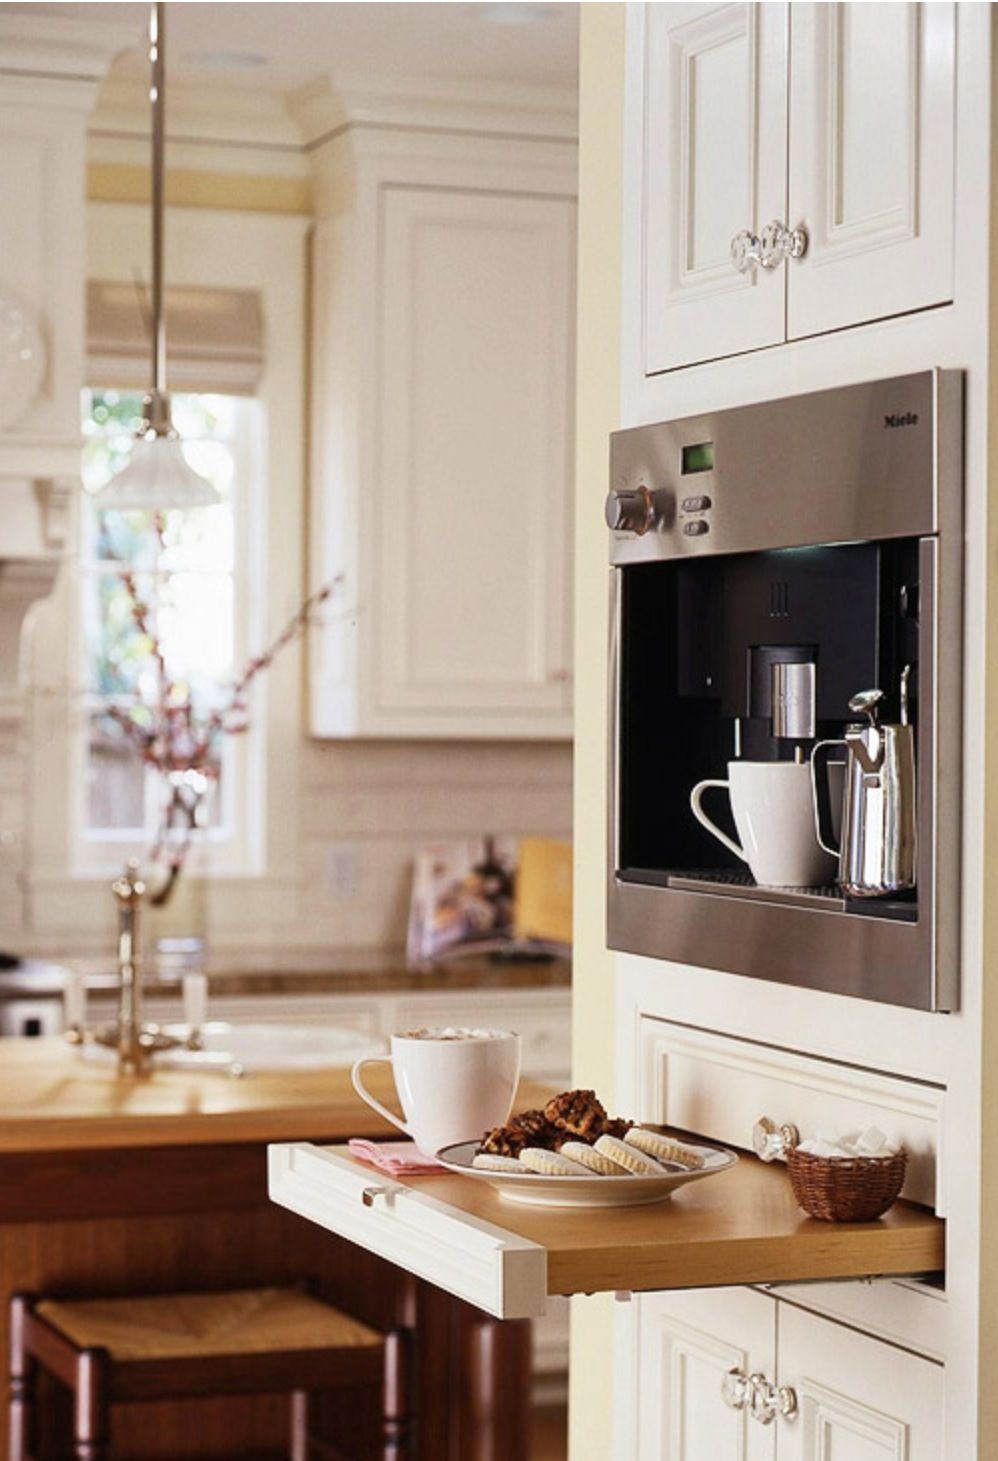 Coffee Center – Be your own barista with a built-in coffee wall unit but be sure